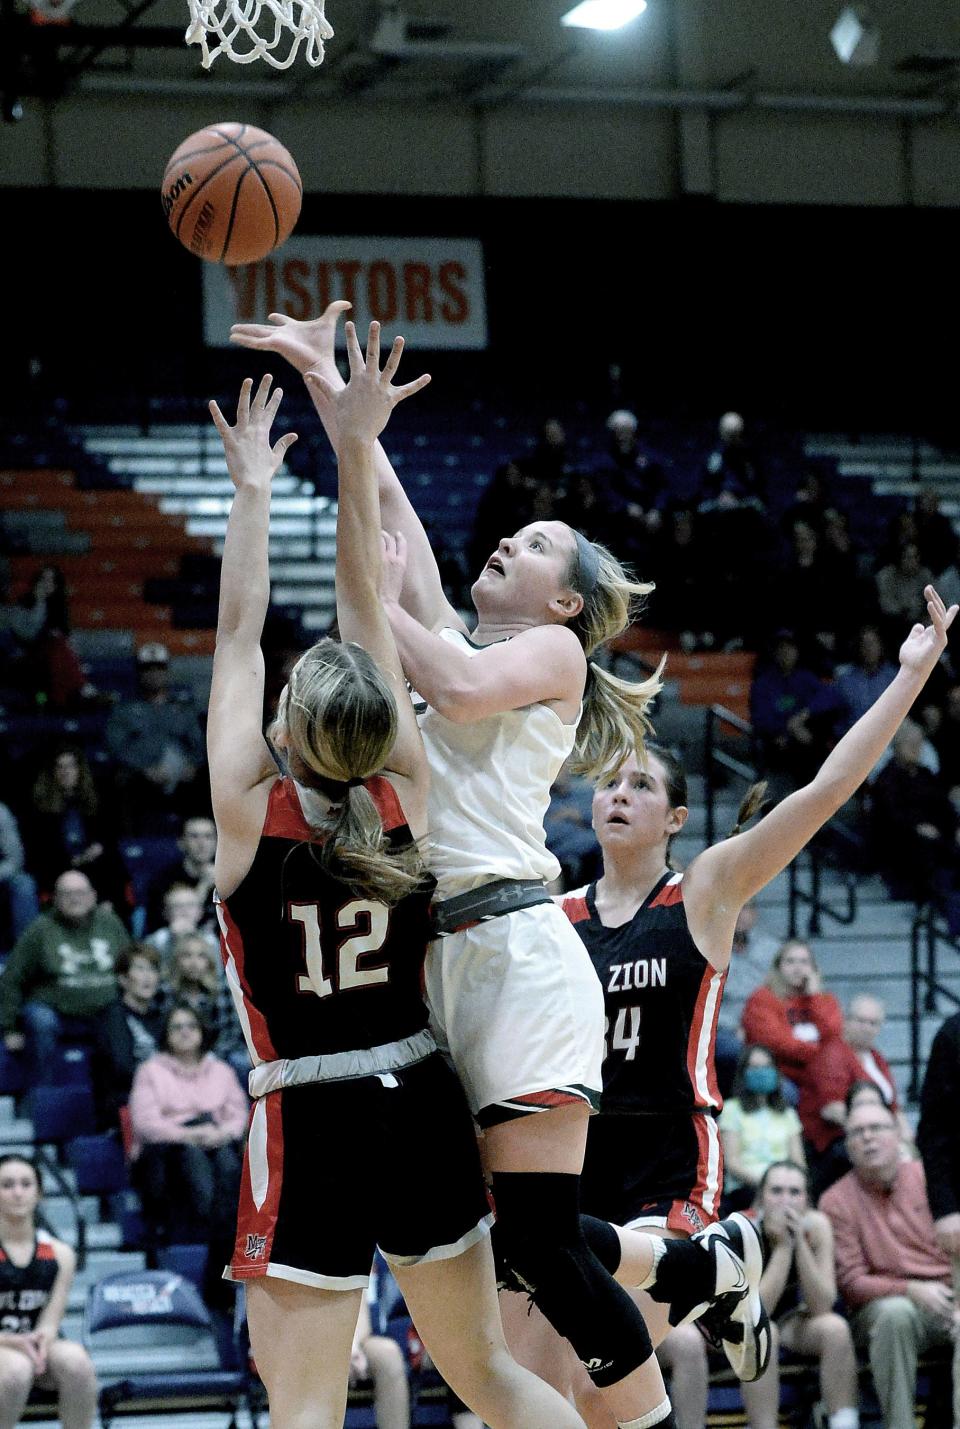 Lincoln Community High School's Kloe Froebe goes up for a shot during the game against Mt. Zion High School Tuesday Feb. 21, 2023.